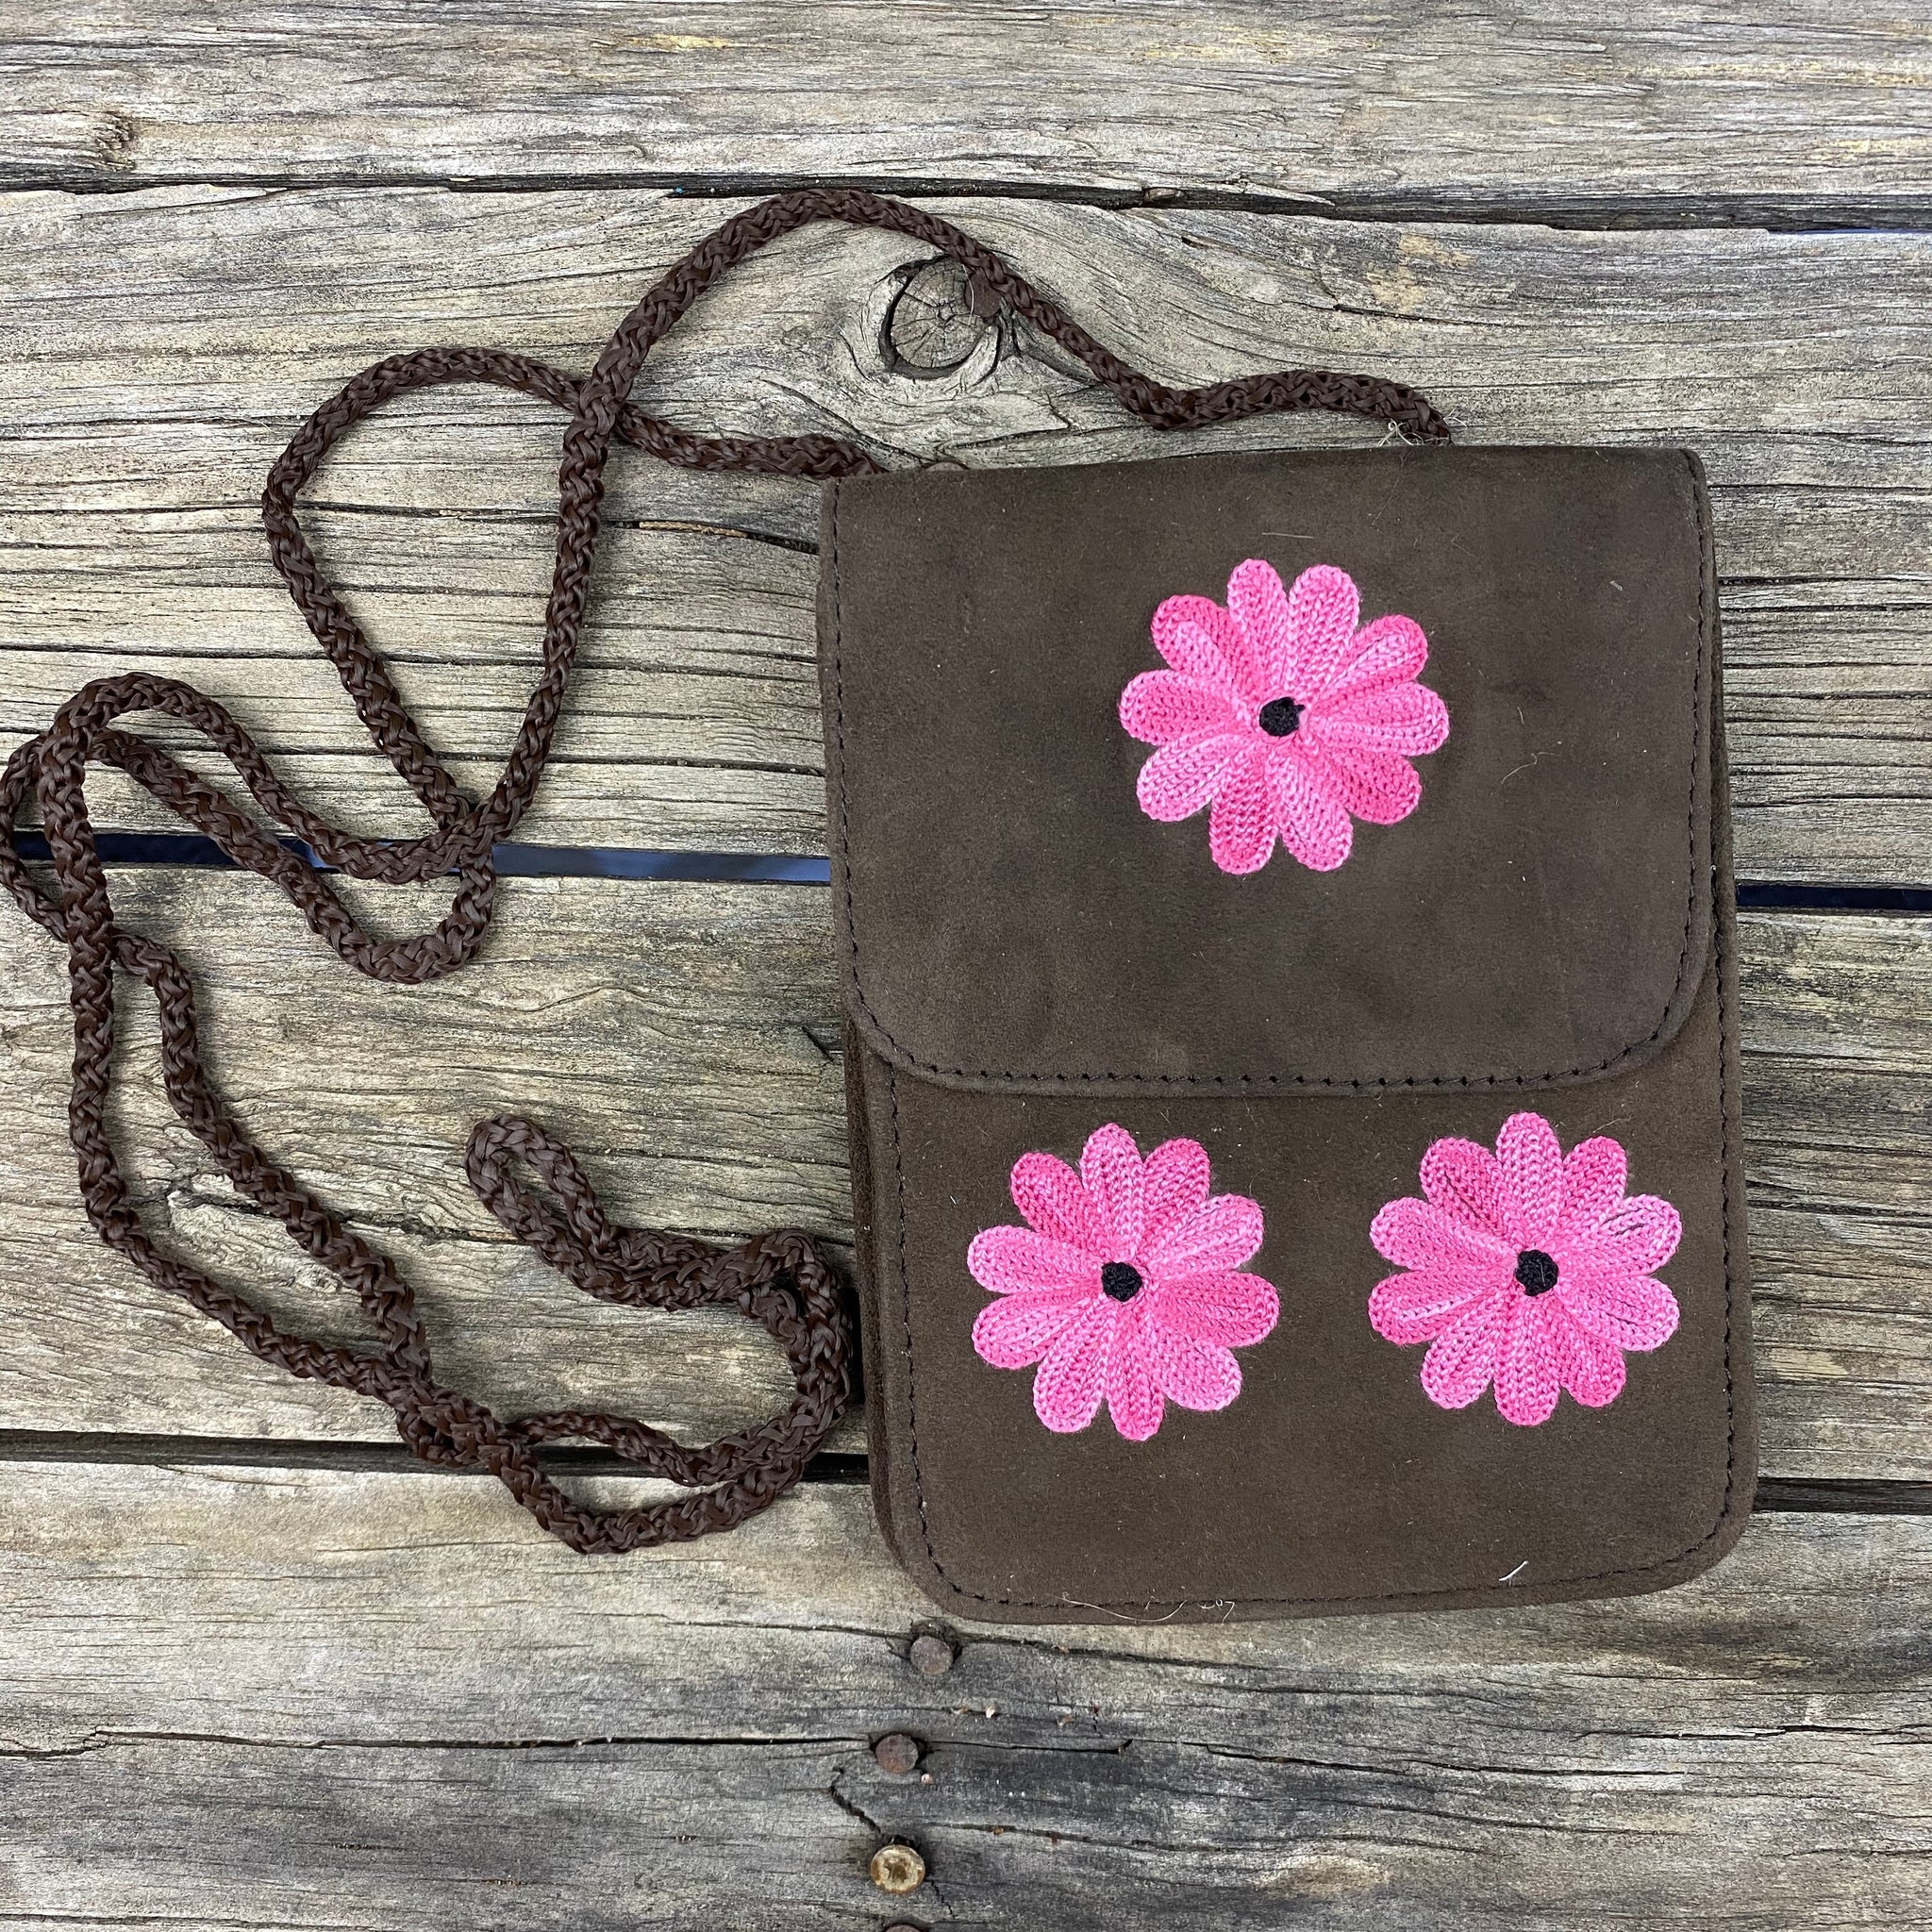 Fair Trade Ethical Embroidered Suede Mobile Bag -Dark Brown